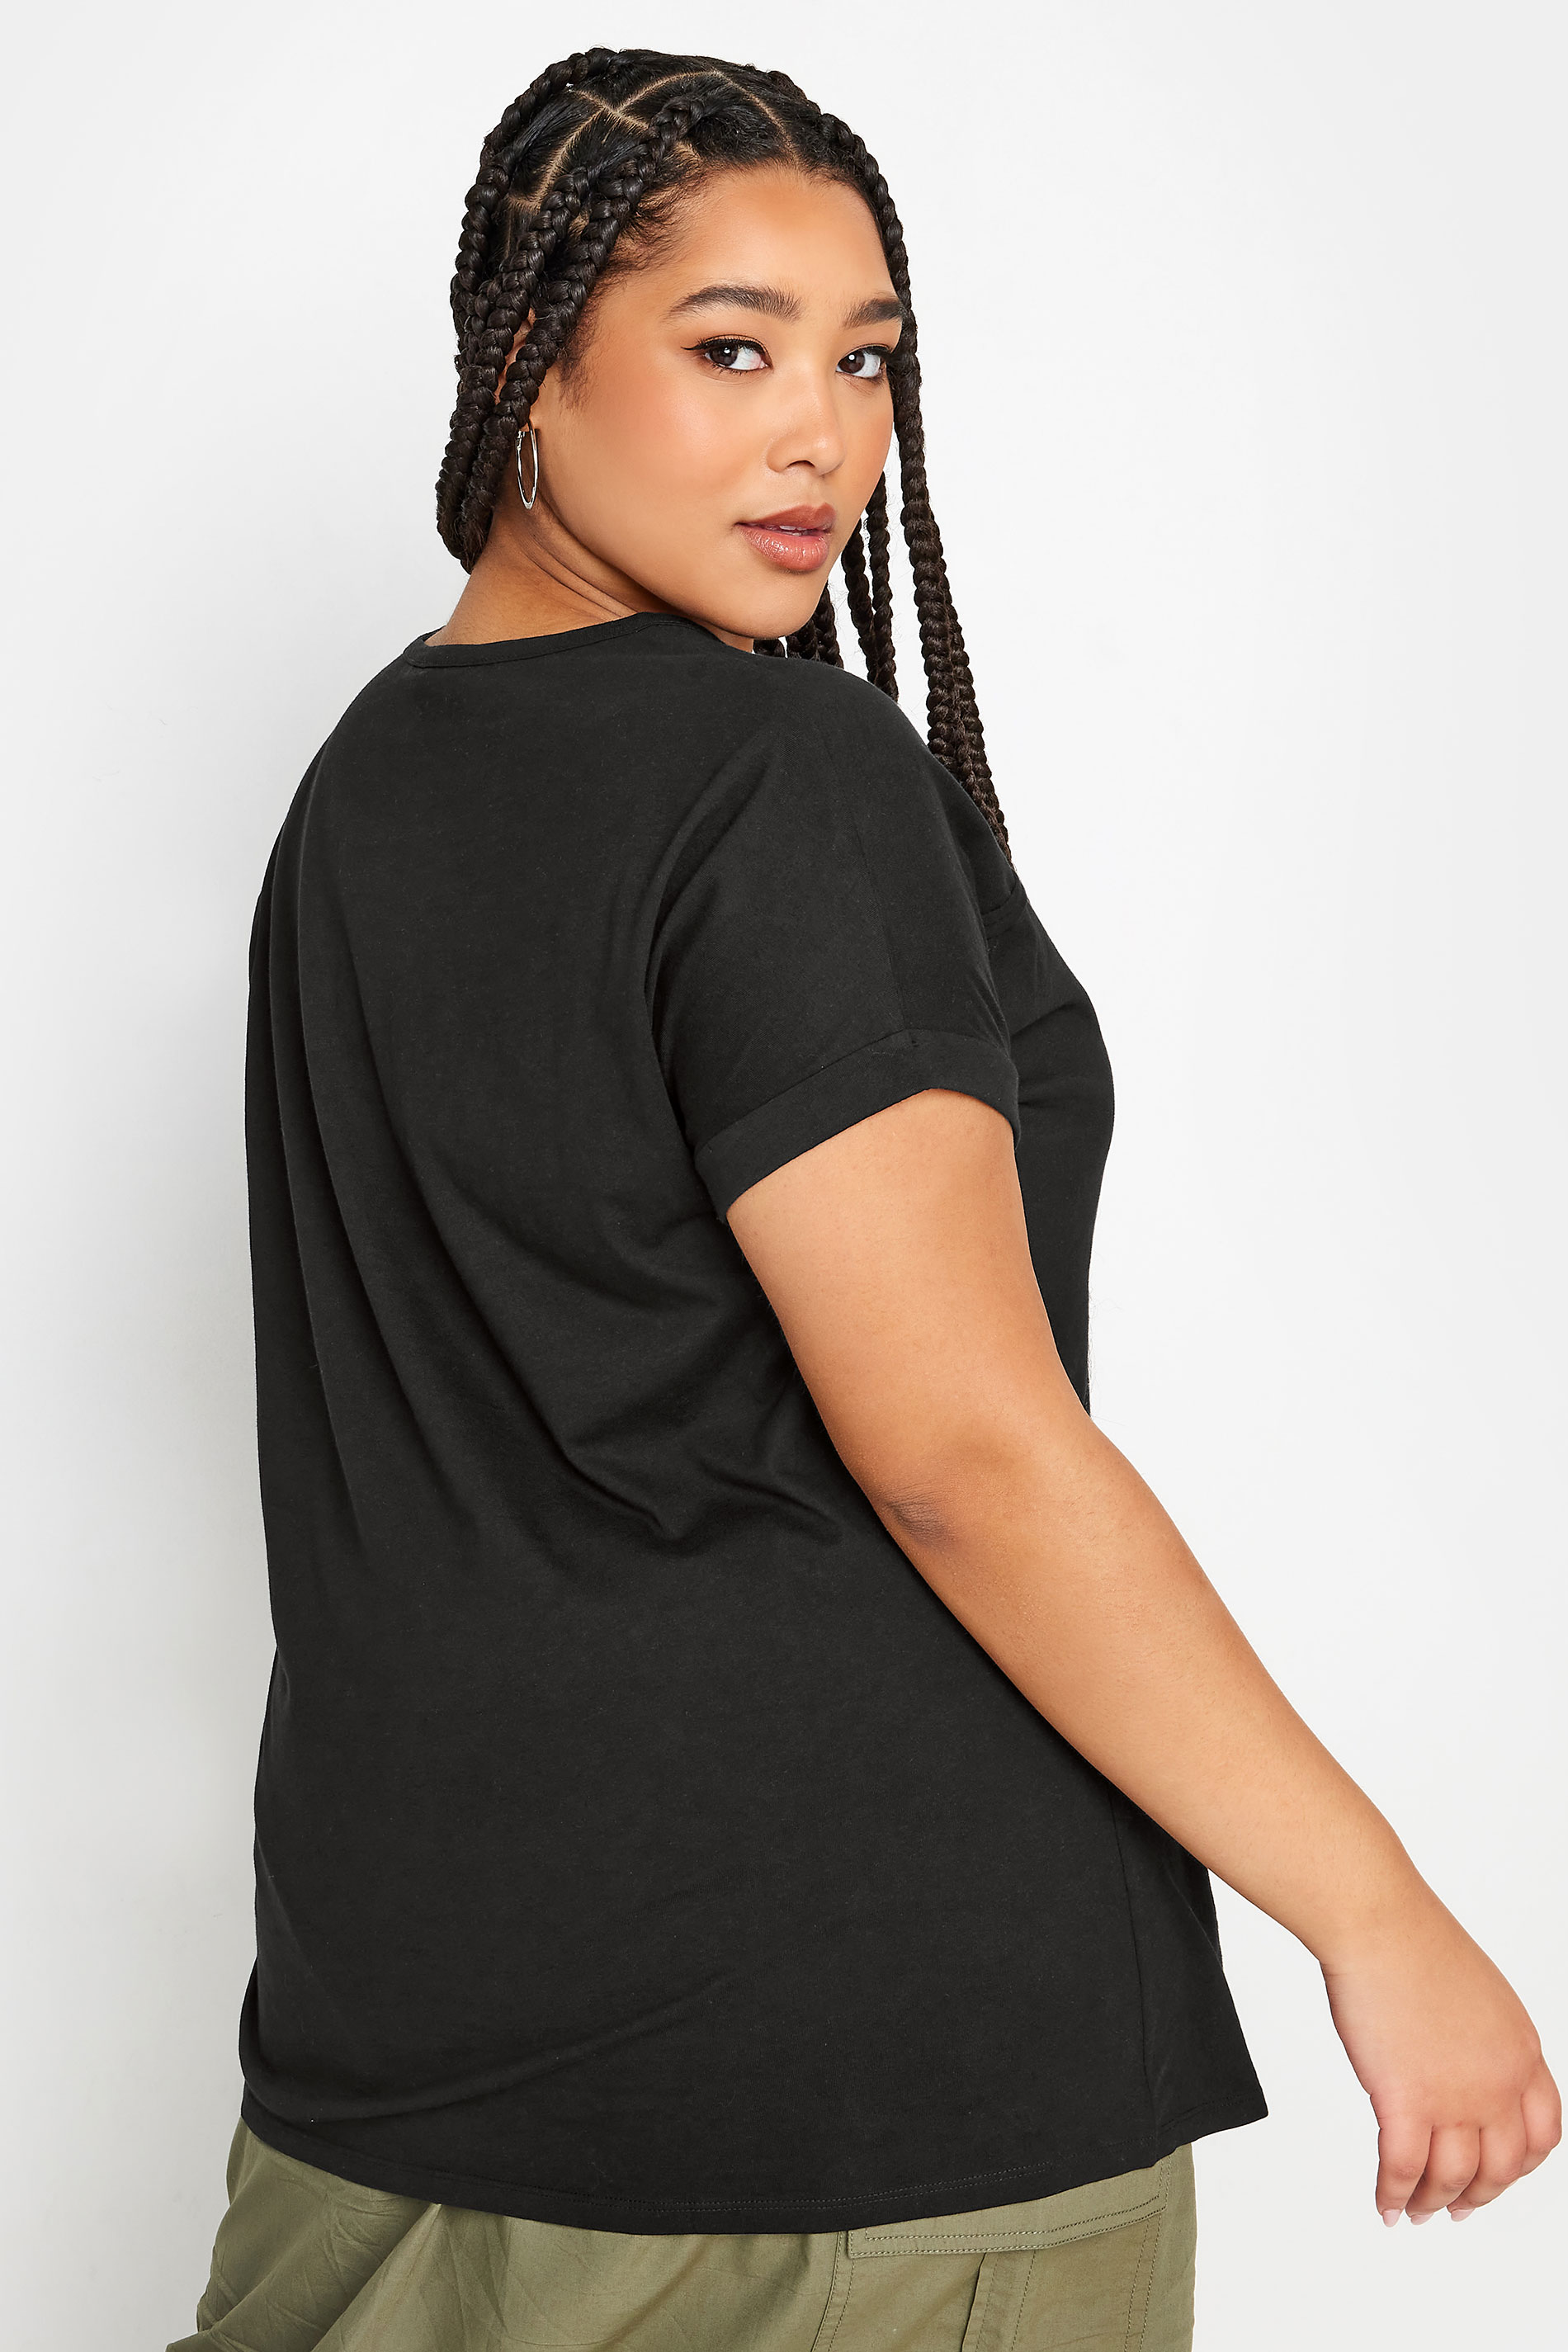 YOURS Curve Grey Cut Out T-Shirt